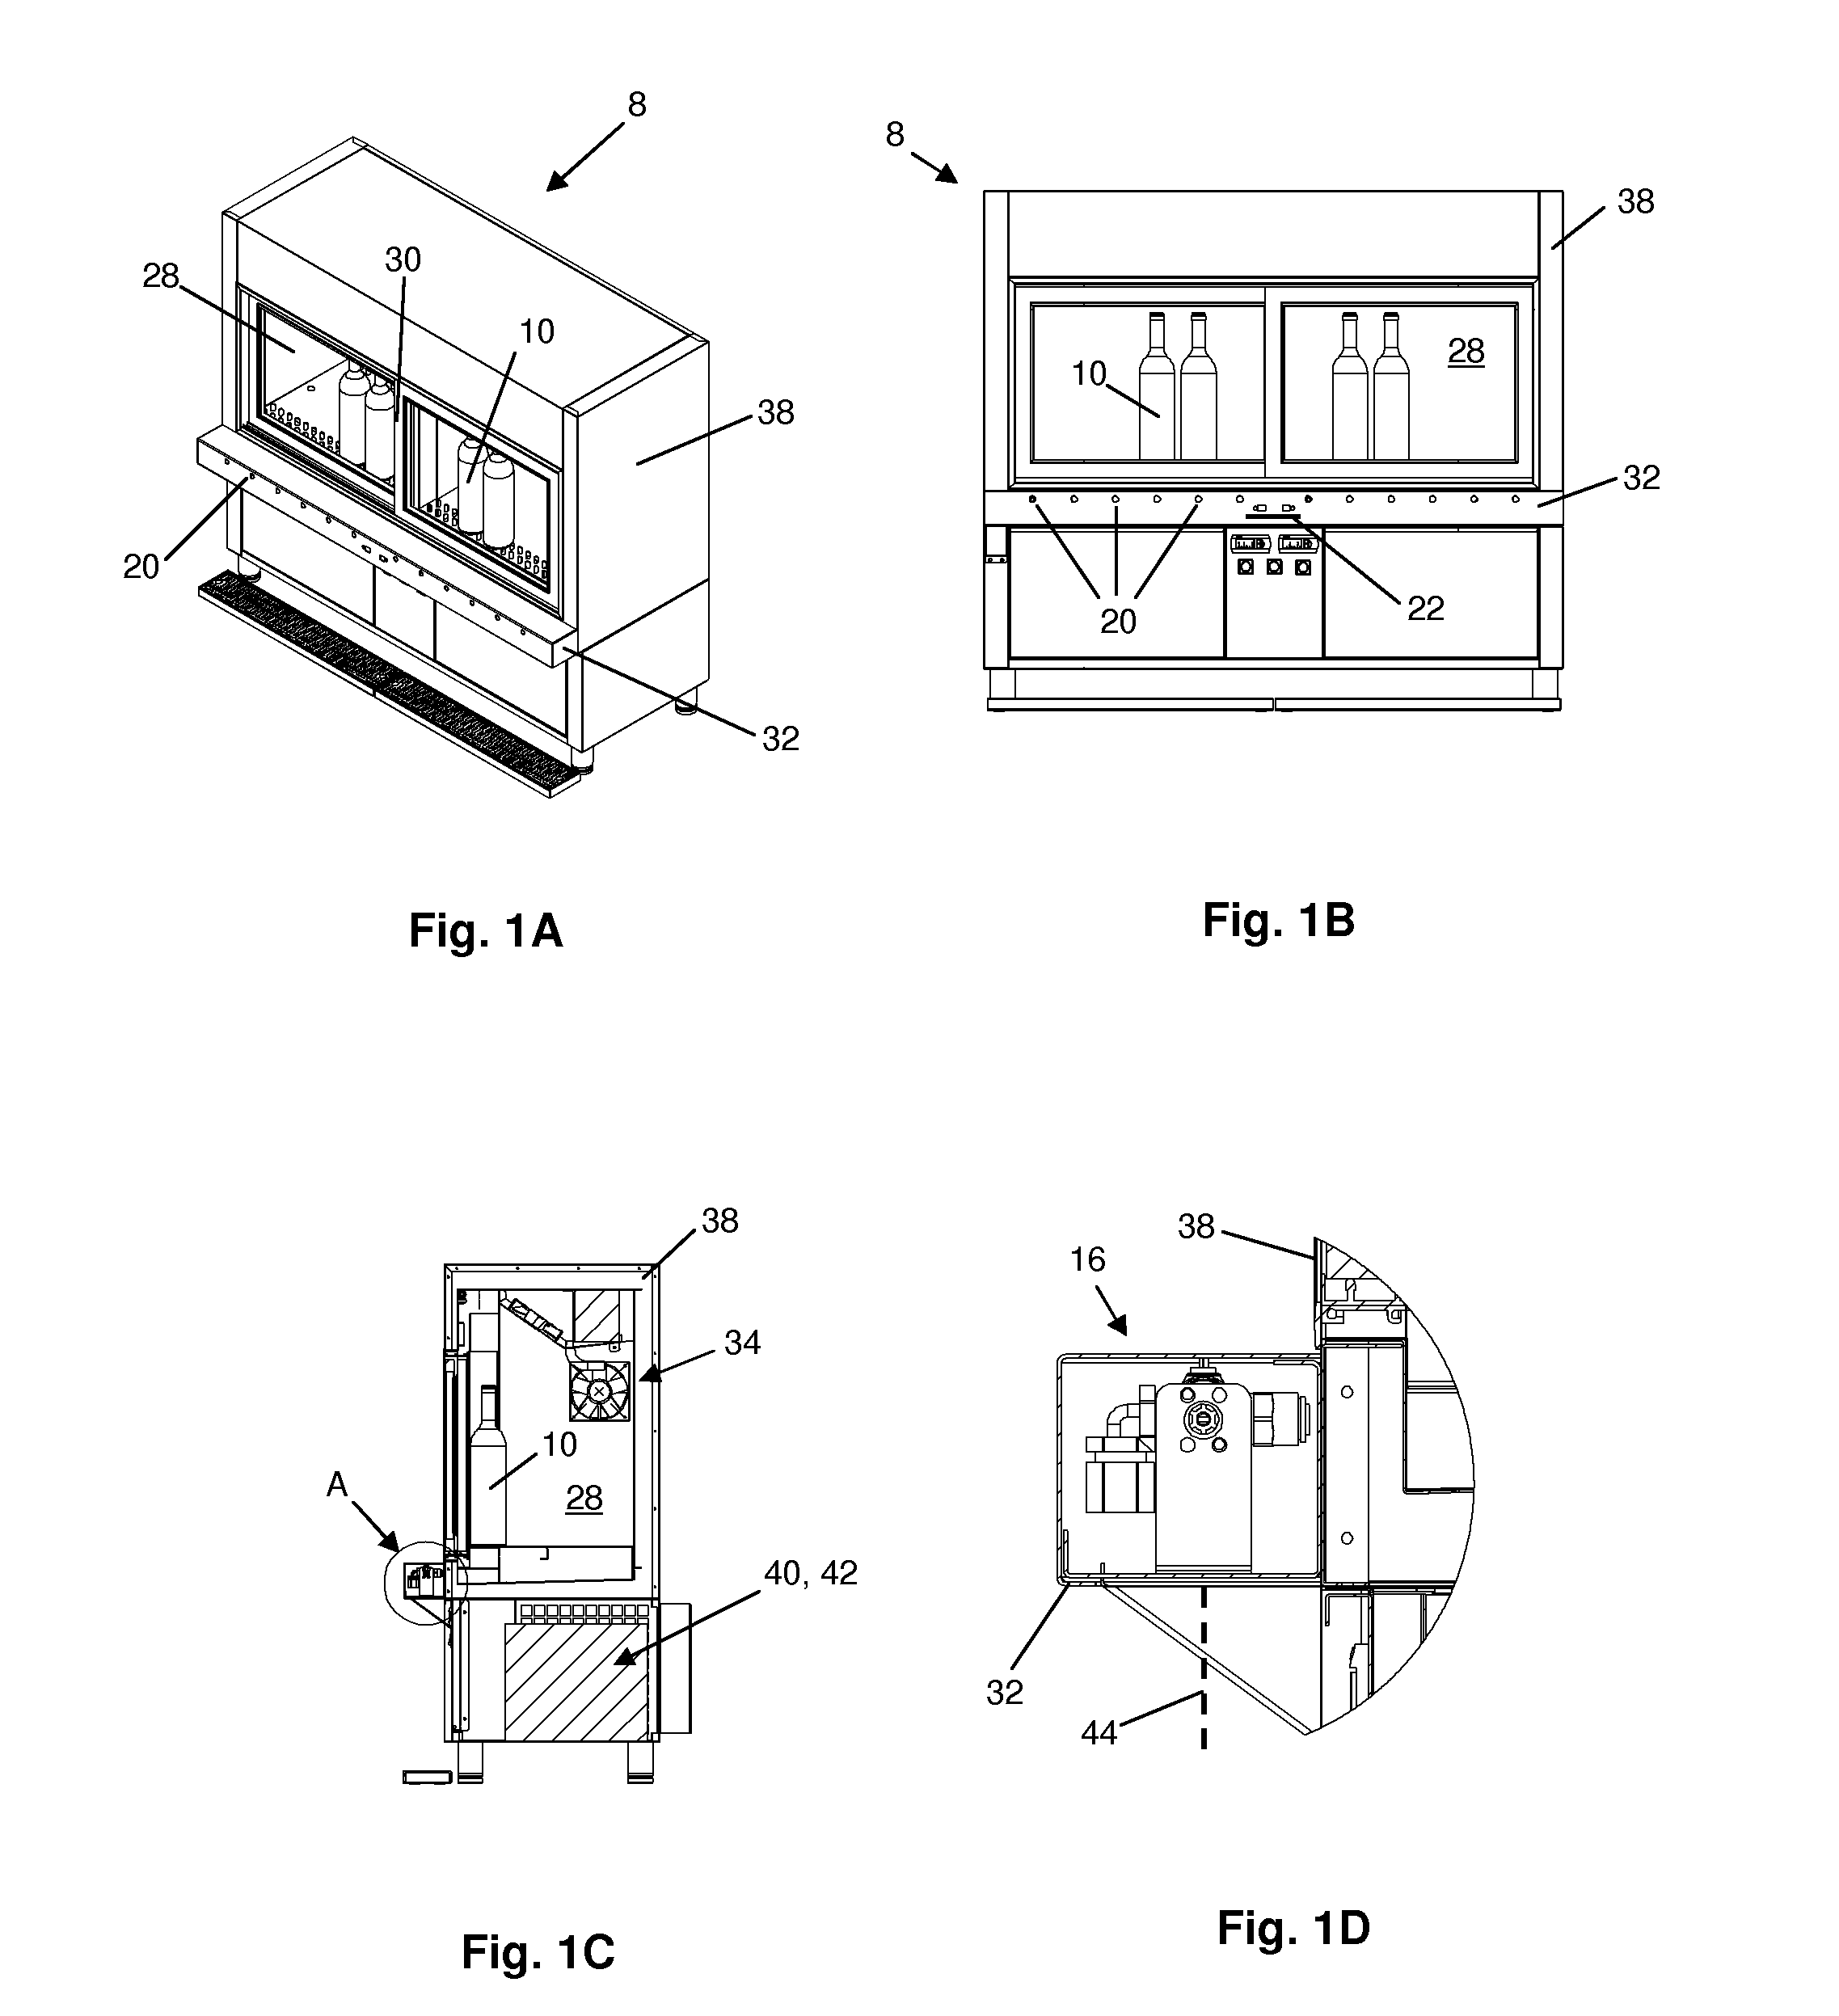 System and Method for Controlled Dispensing and Marketing of Potable Liquids